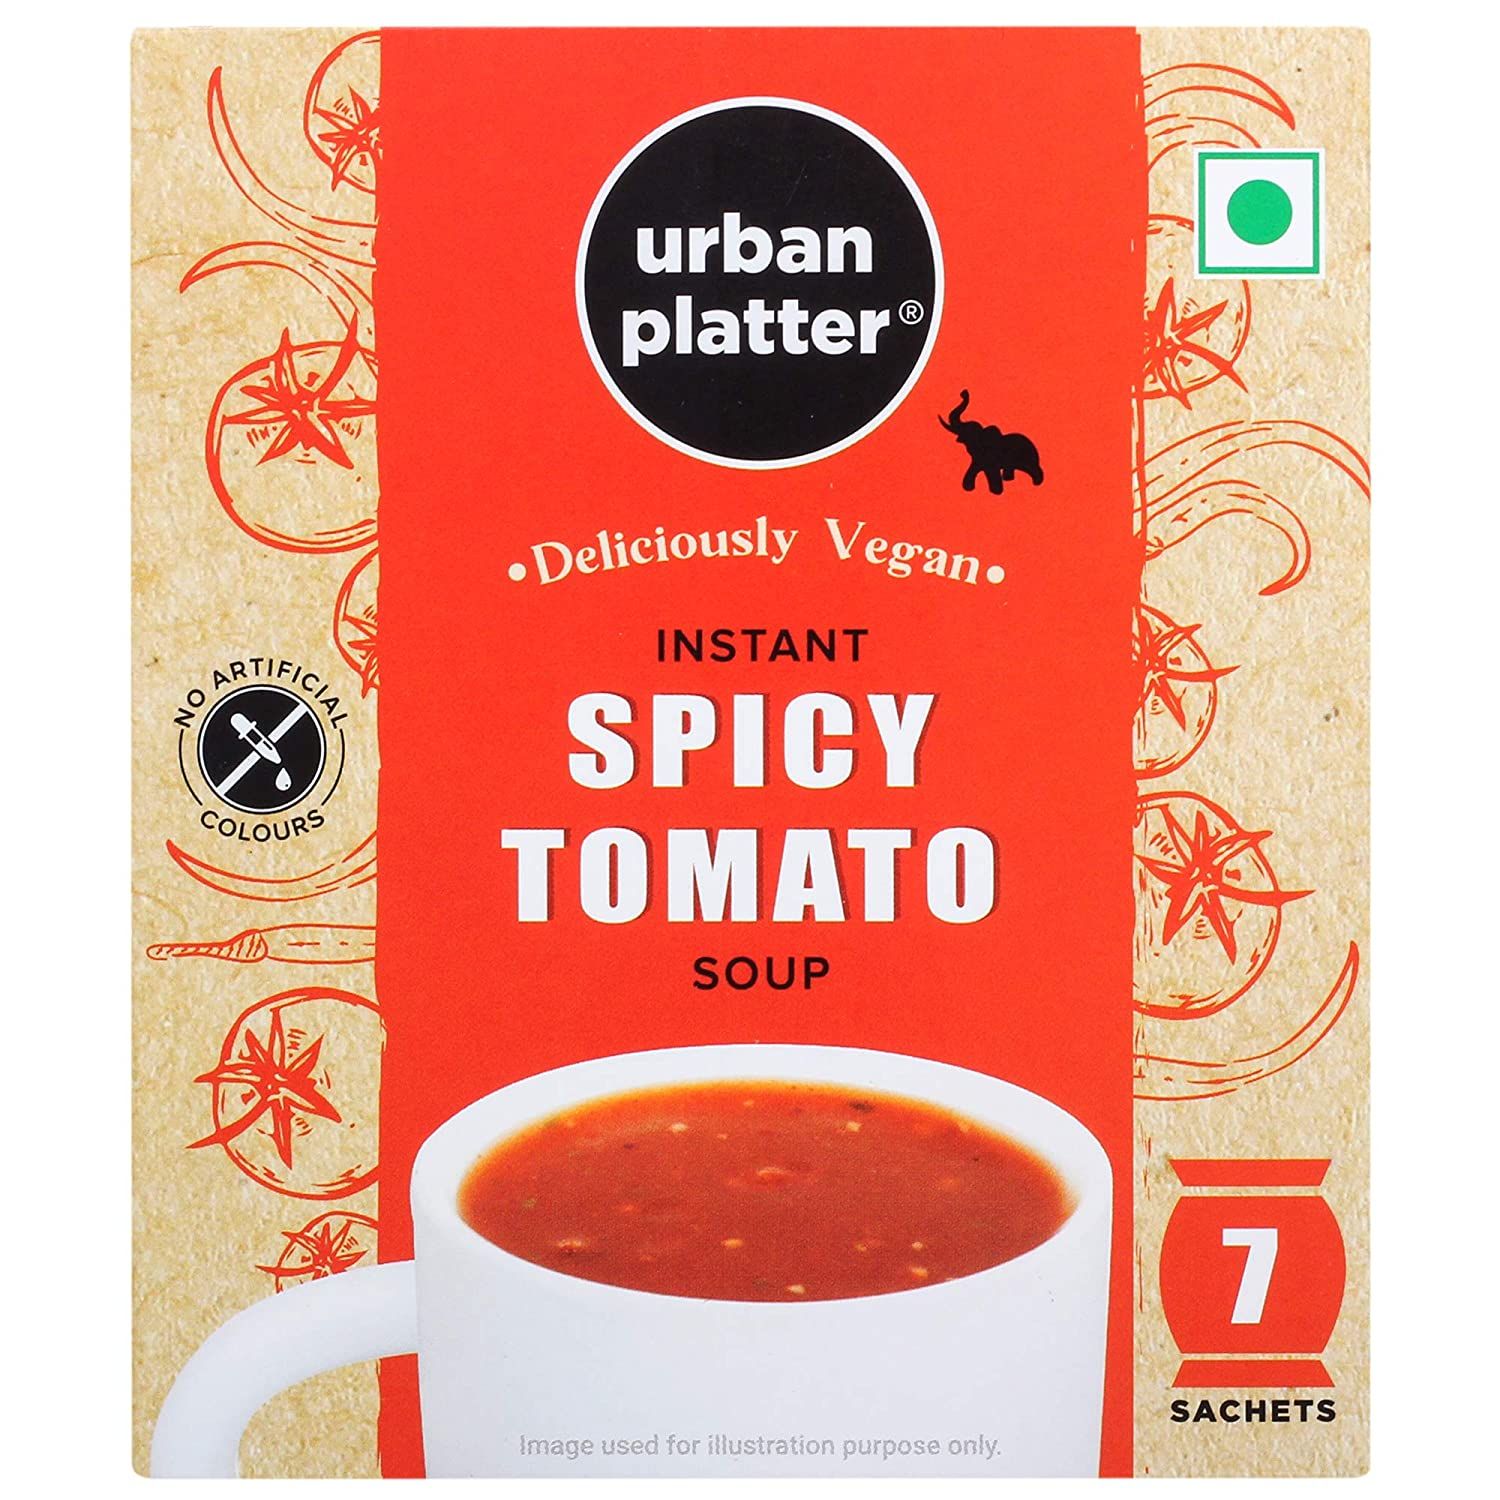 Urban Platter Vegan Instant Spicy Tomato Cup Soup Image